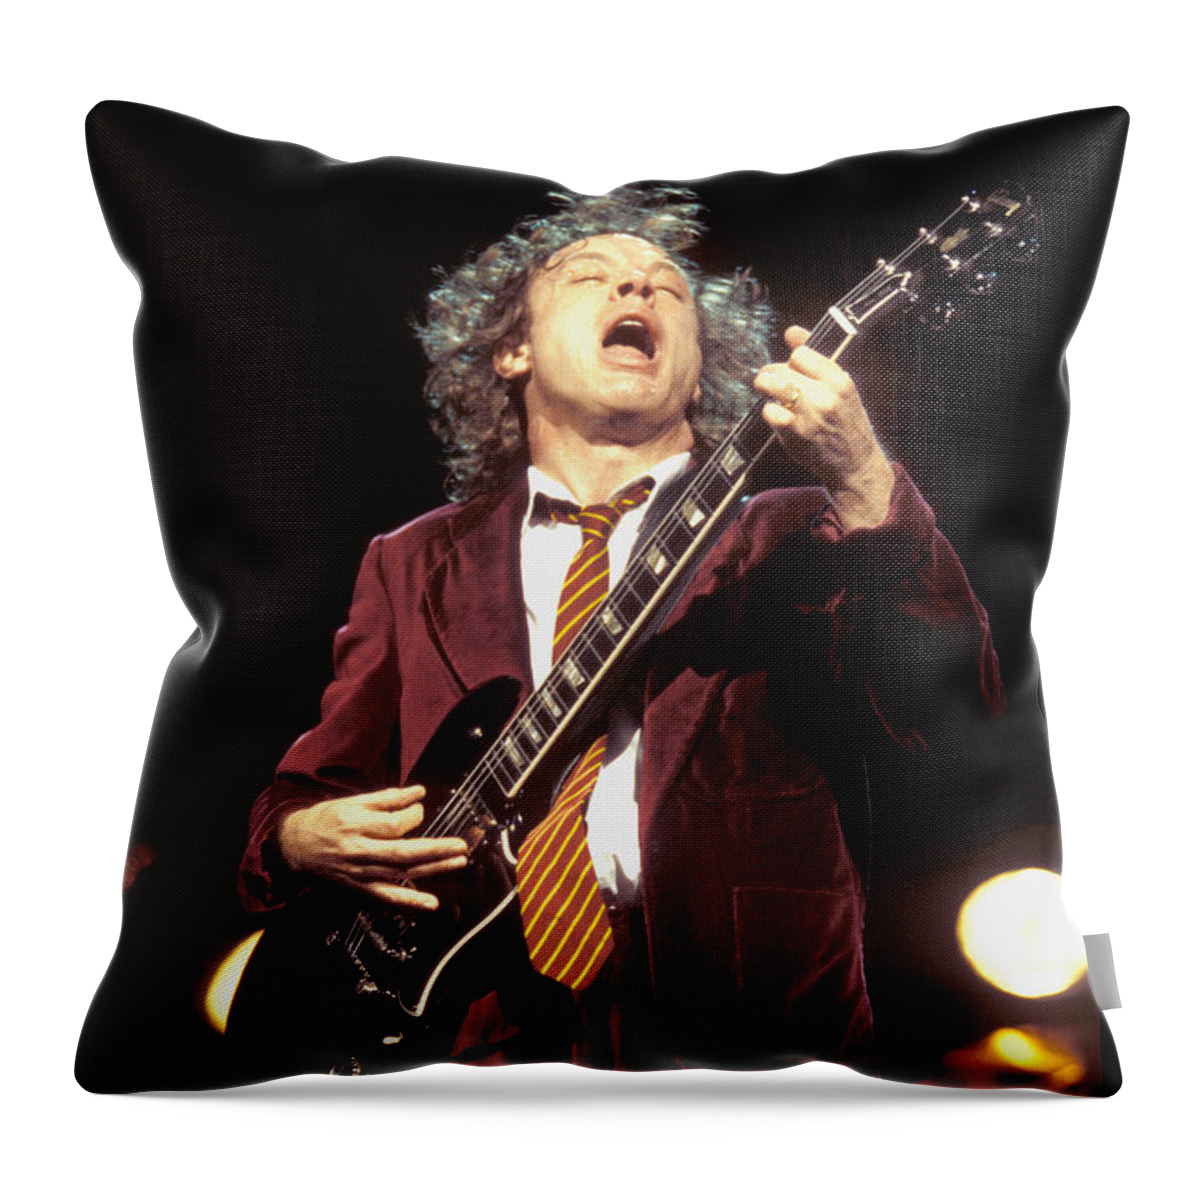 Ac/dc Guitarist Angus Young Is Shown Performing On Stage During A Live Concert Appearance Throw Pillow featuring the photograph Ac Dc - Angus Young #1 by Concert Photos